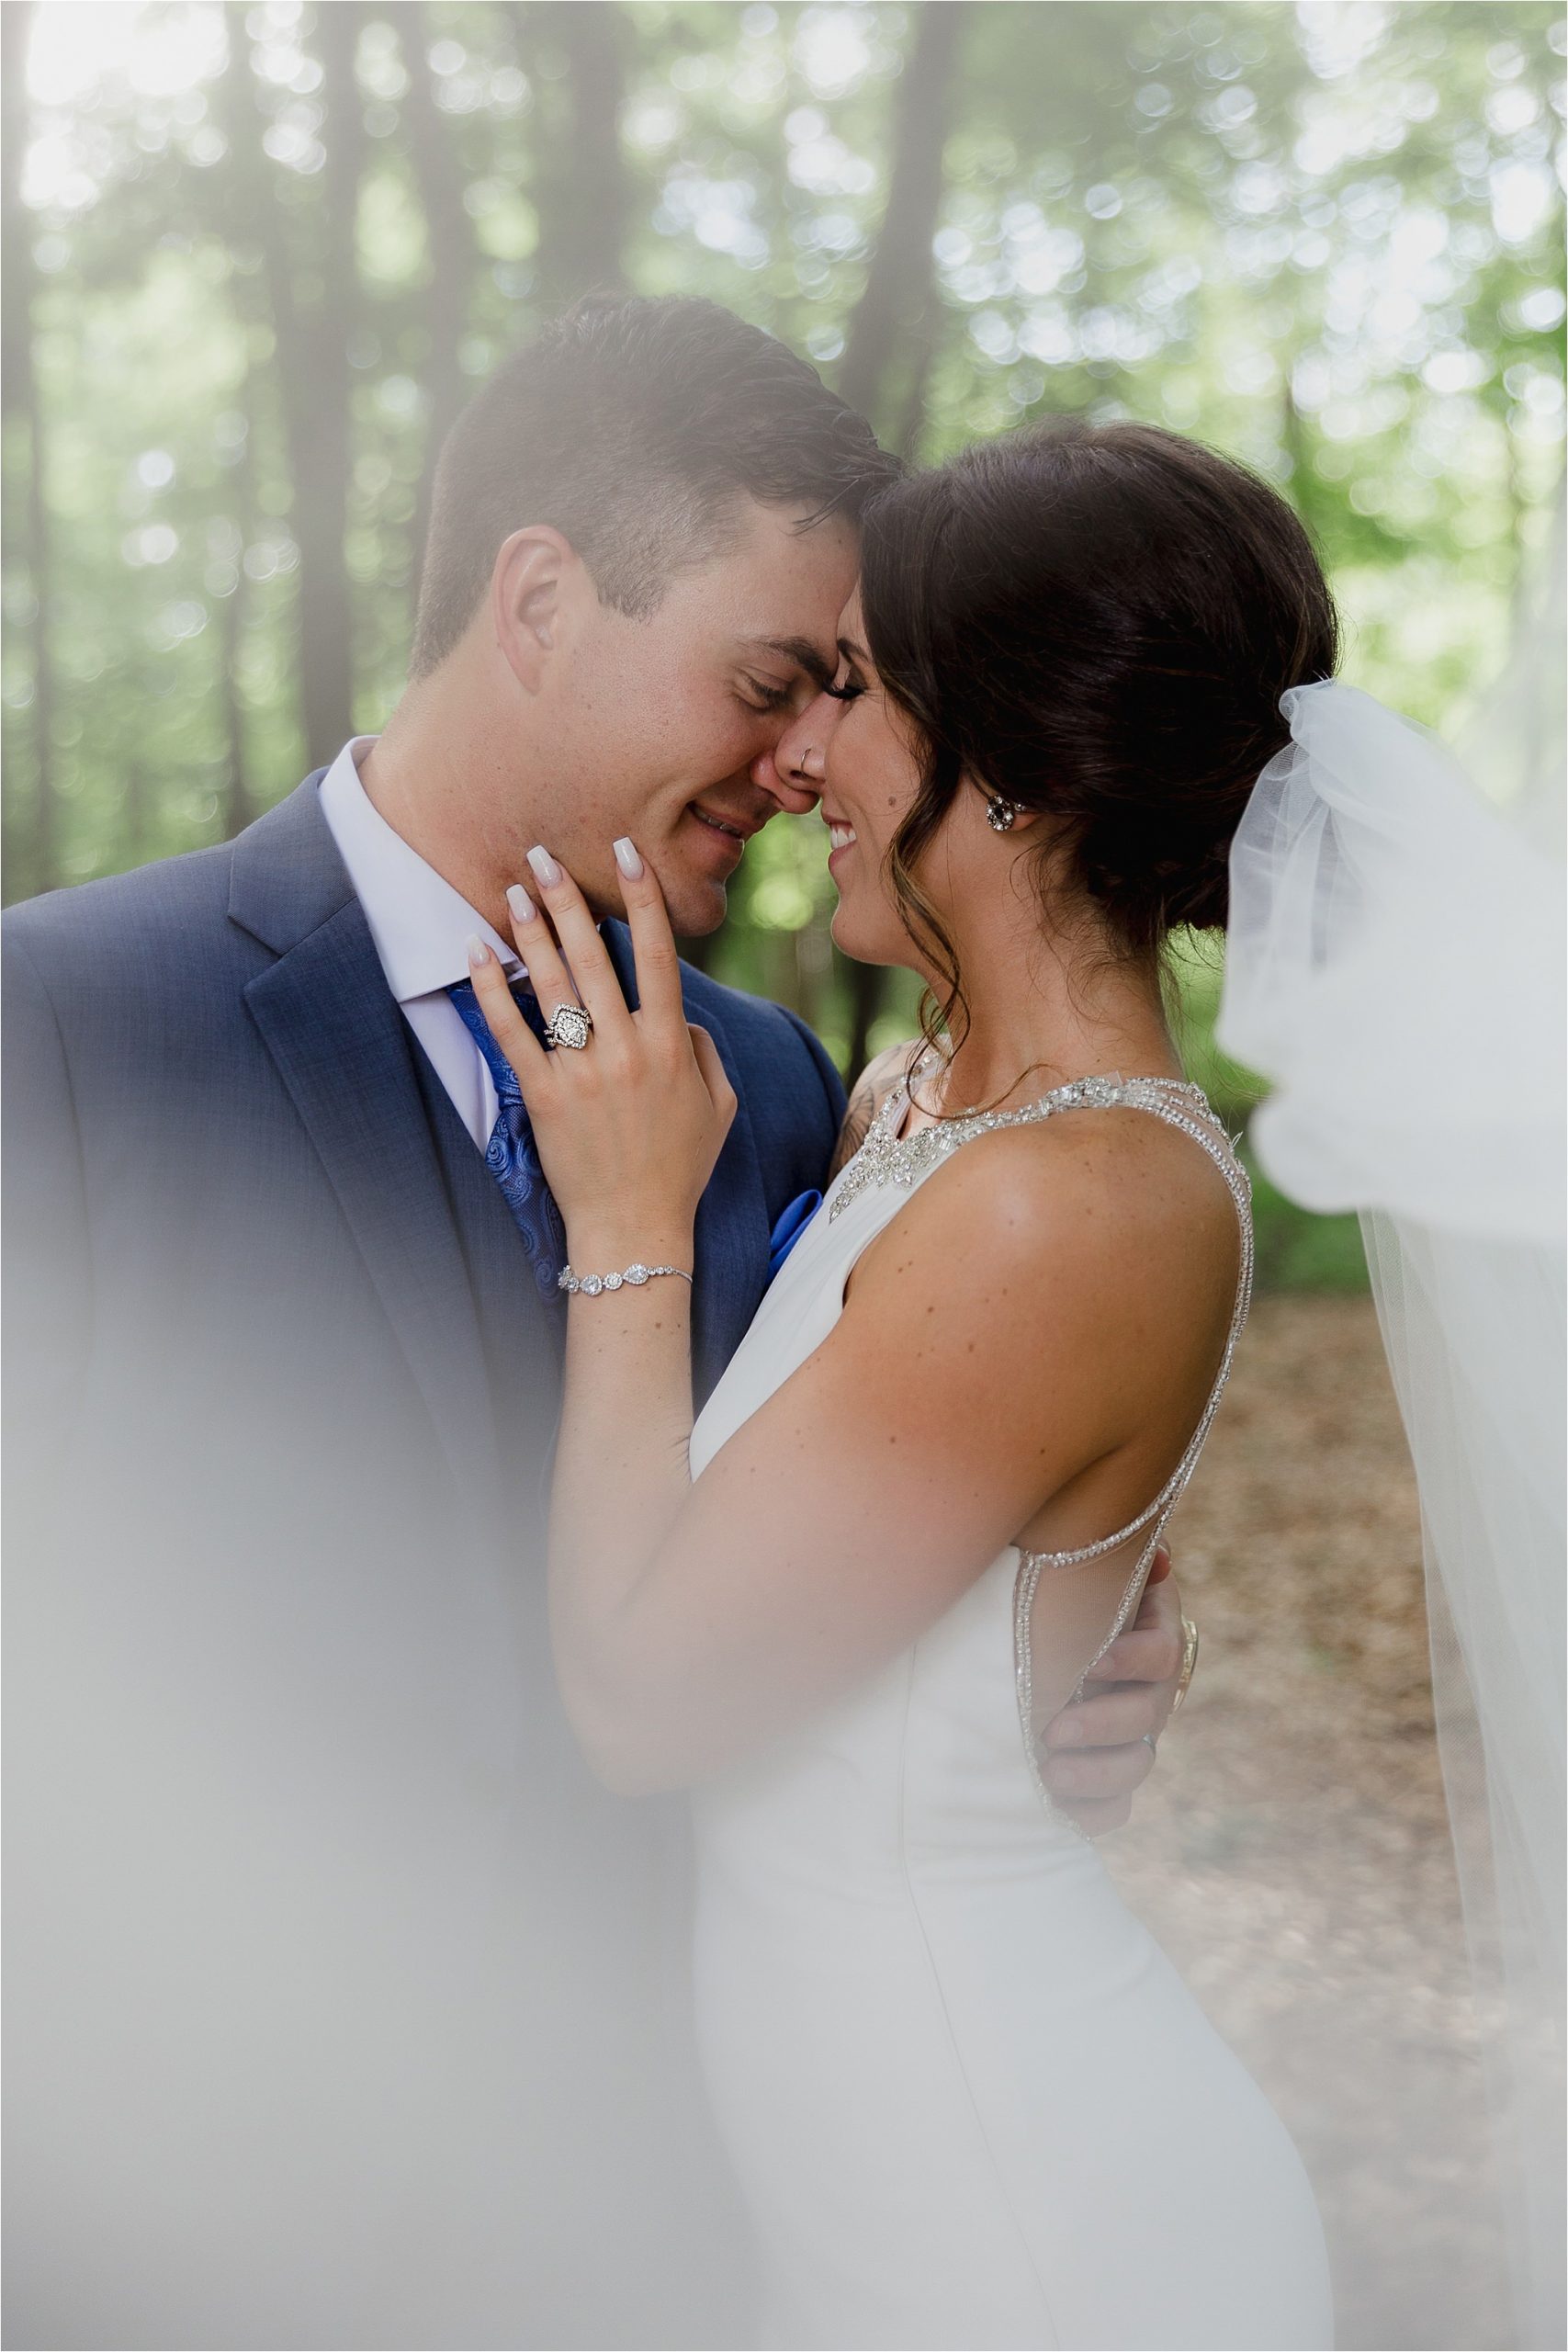 Sonia V Photography, The Clearing ceremony wedding venue, bride and groom portraits